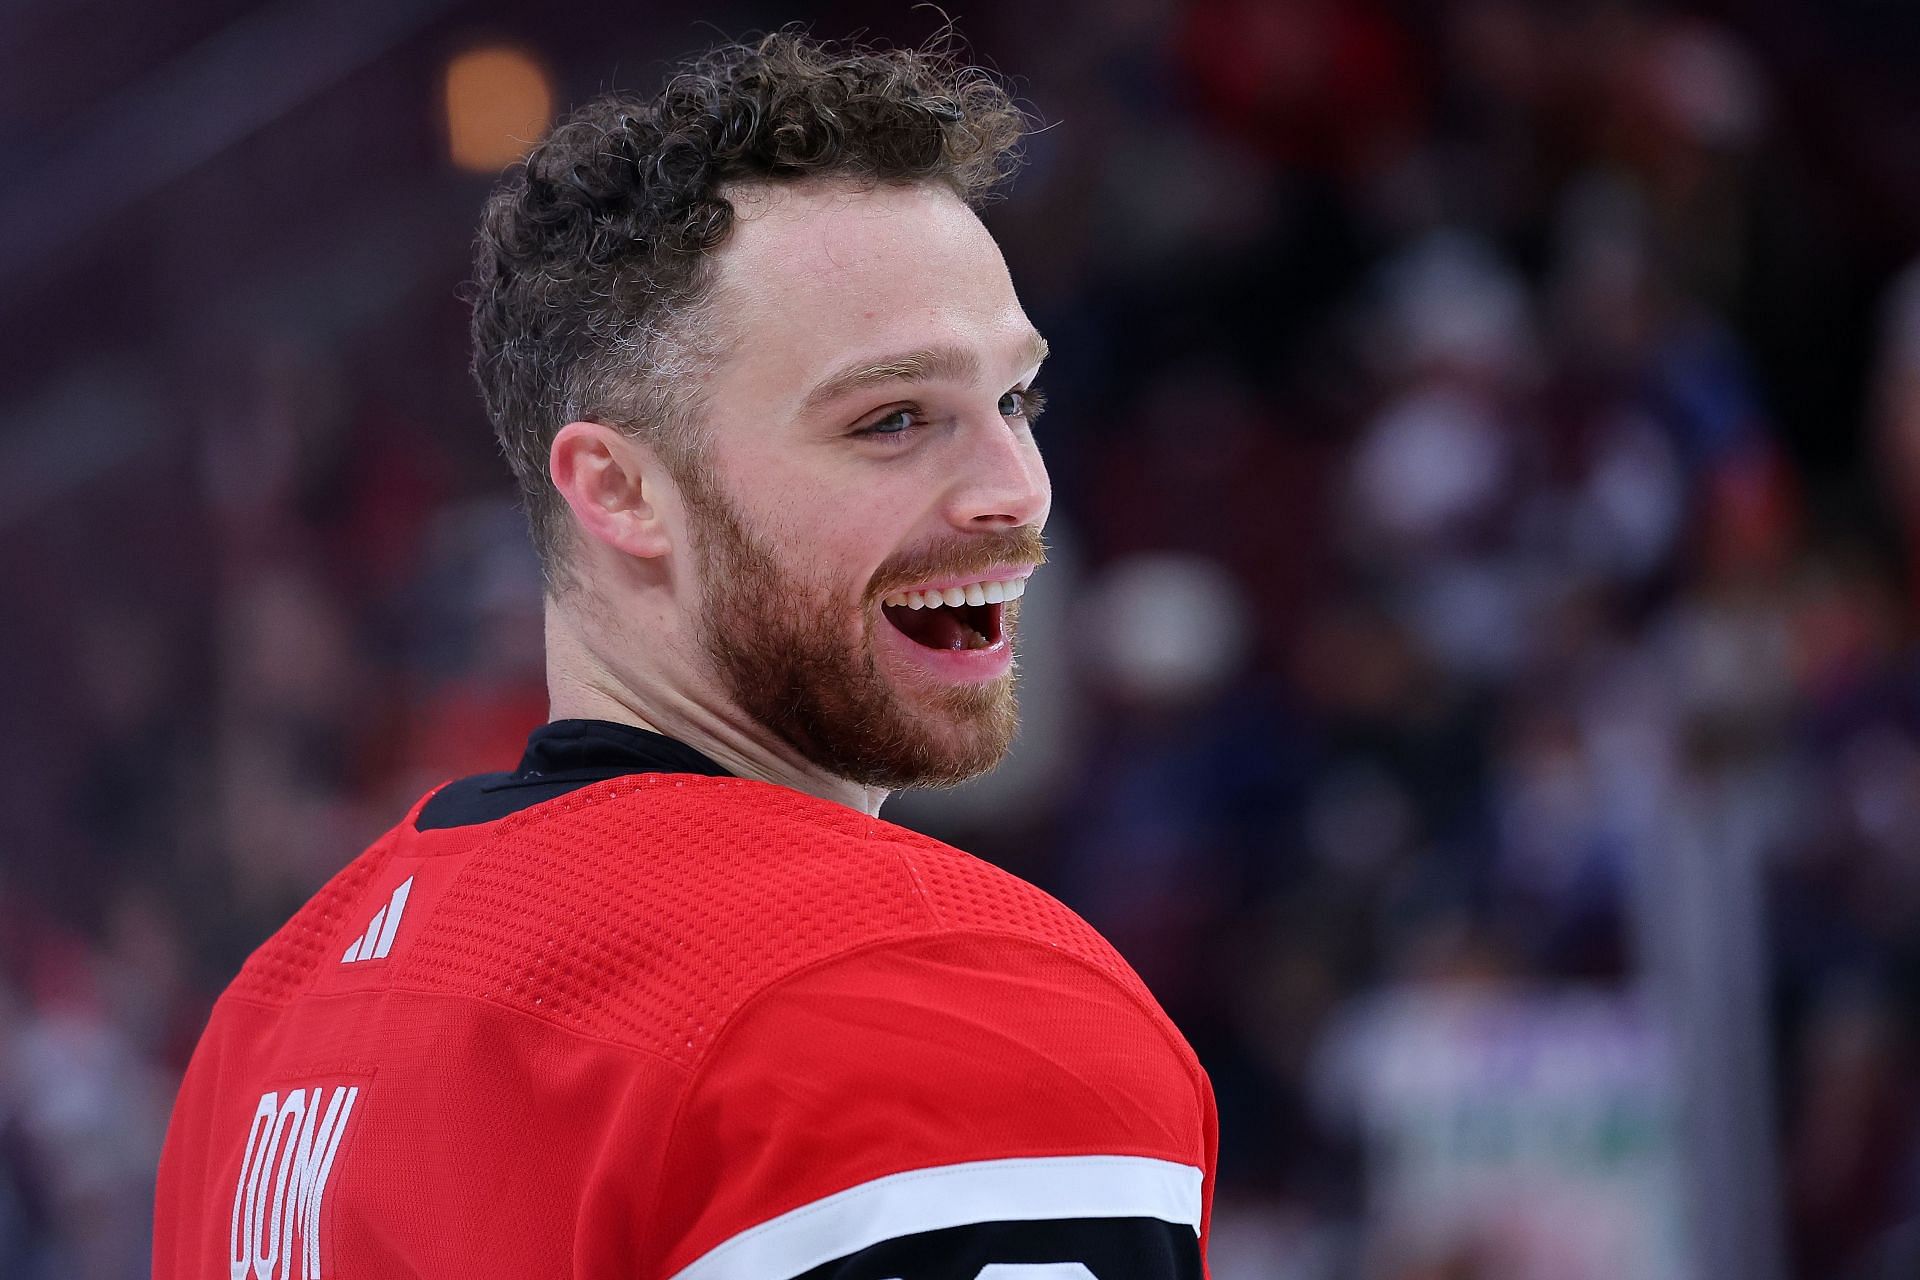 Max Domi Follows in Dad's Footsteps to Maple Leafs